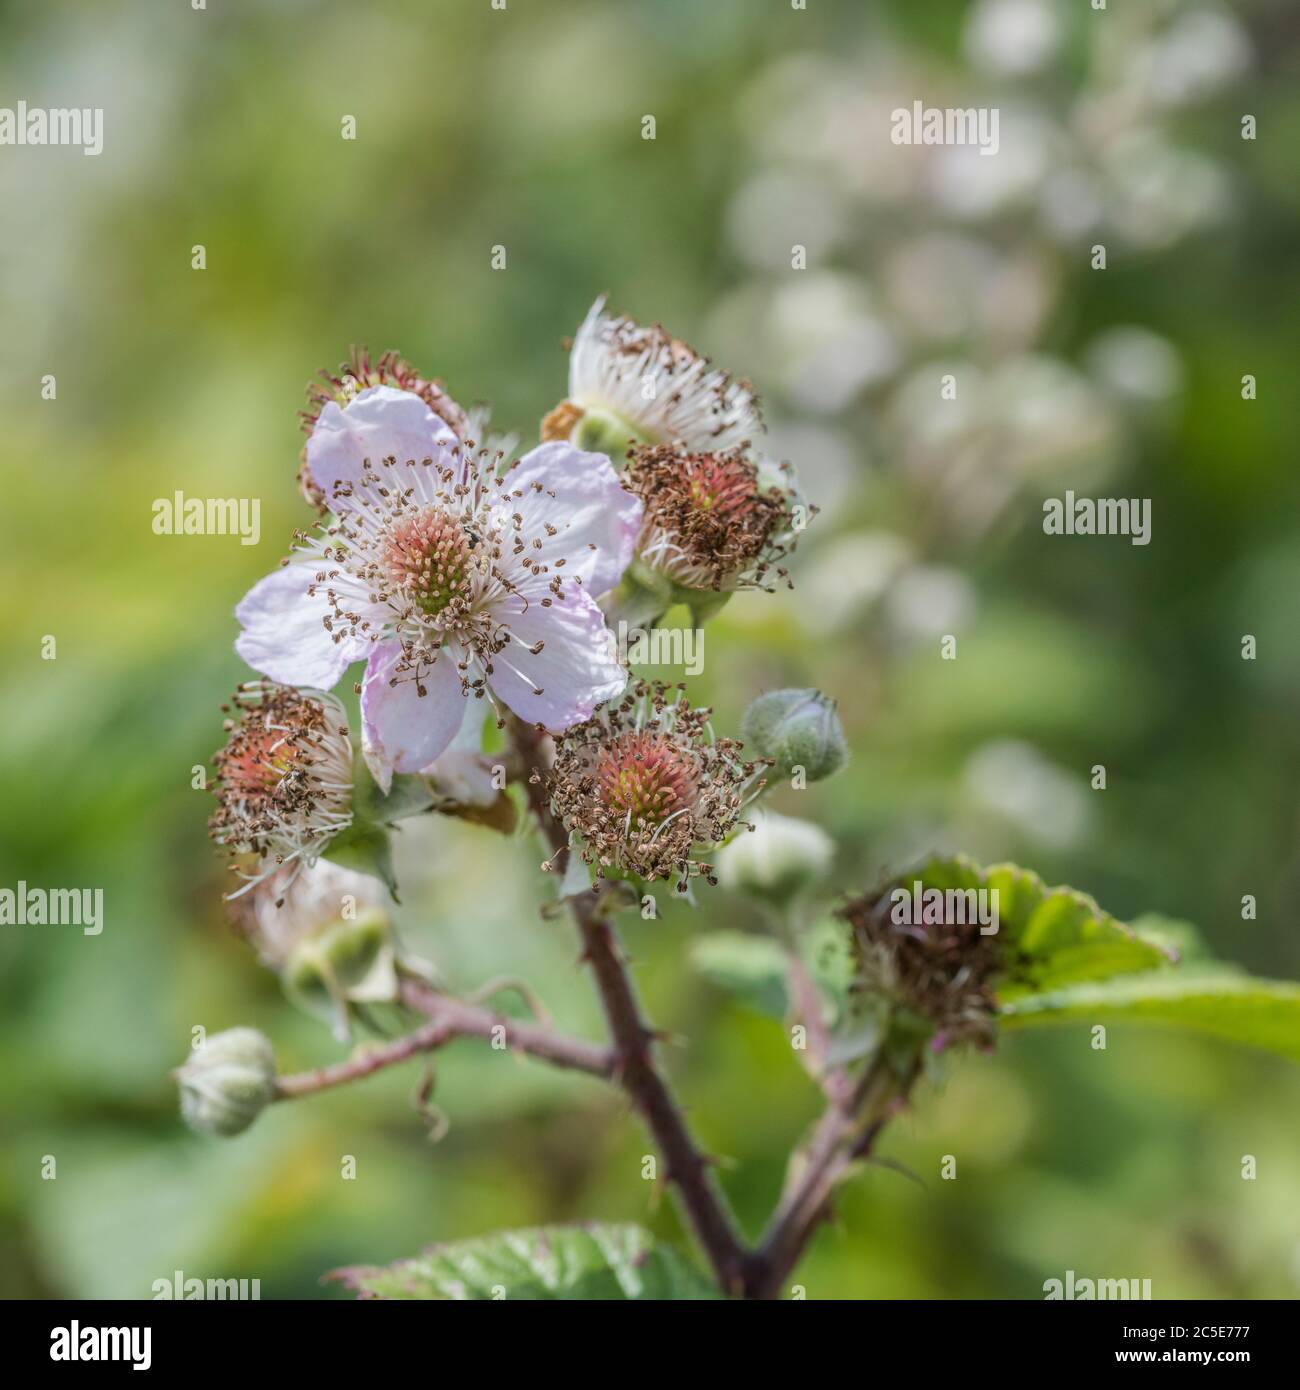 Sunlit white flower & flower buds of Bramble / Rubus fruticosus in UK hedgerow. Source of blackberries, obviously, and once used as a medicinal plant. Stock Photo